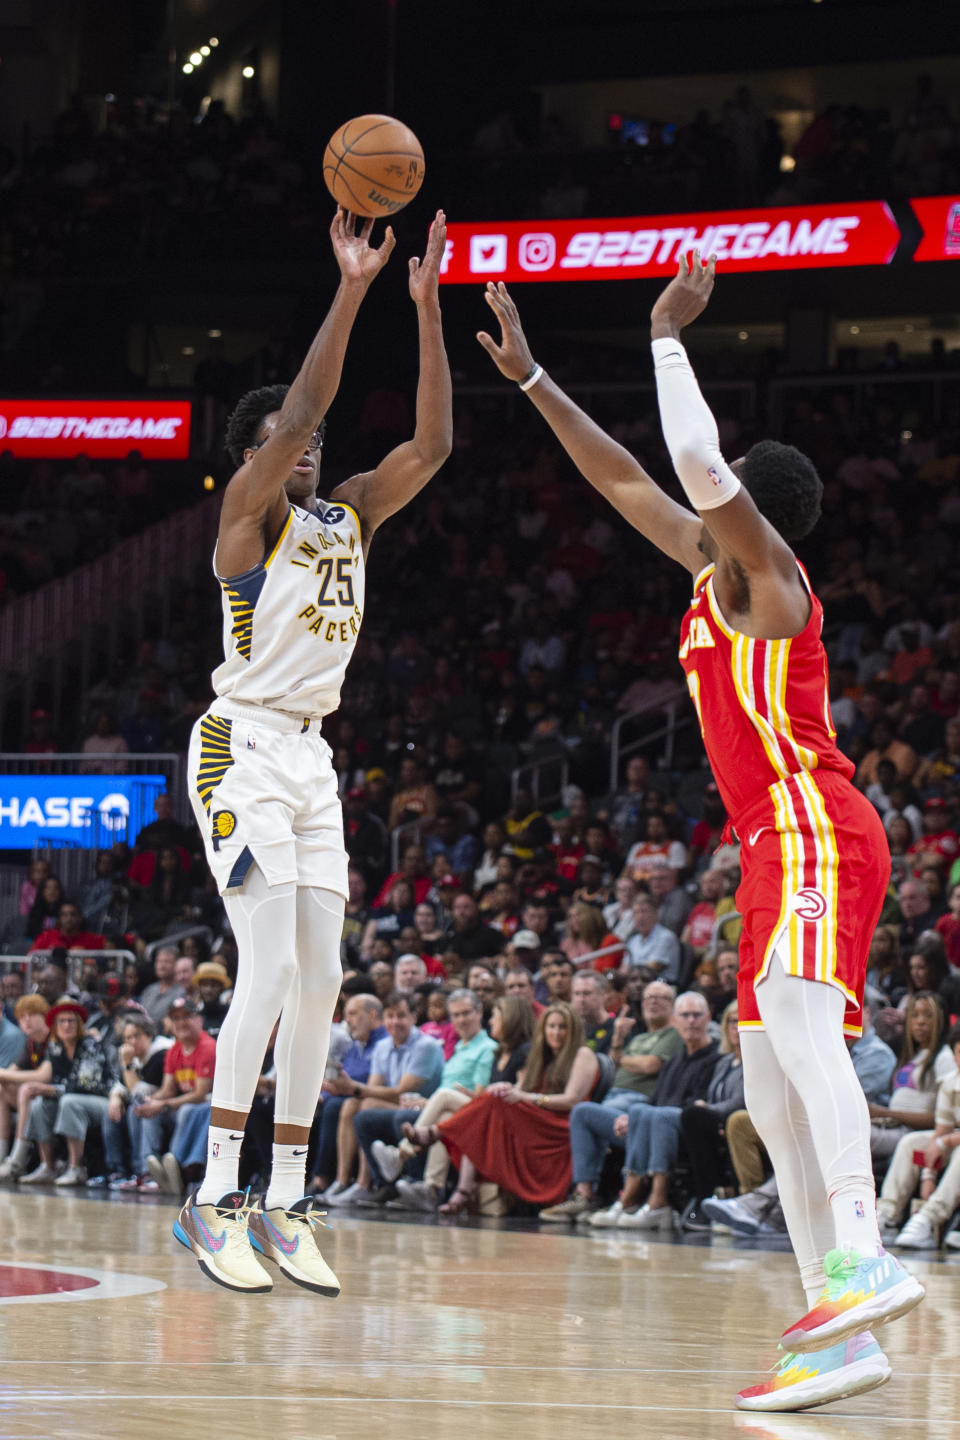 Indiana Pacers forward Jalen Smith shoots a 3-pointer over Atlanta Hawks forward Onyeka Okongwu during the second half of an NBA basketball game, Saturday, March 25, 2023, in Atlanta. (AP Photo/Hakim Wright Sr.)